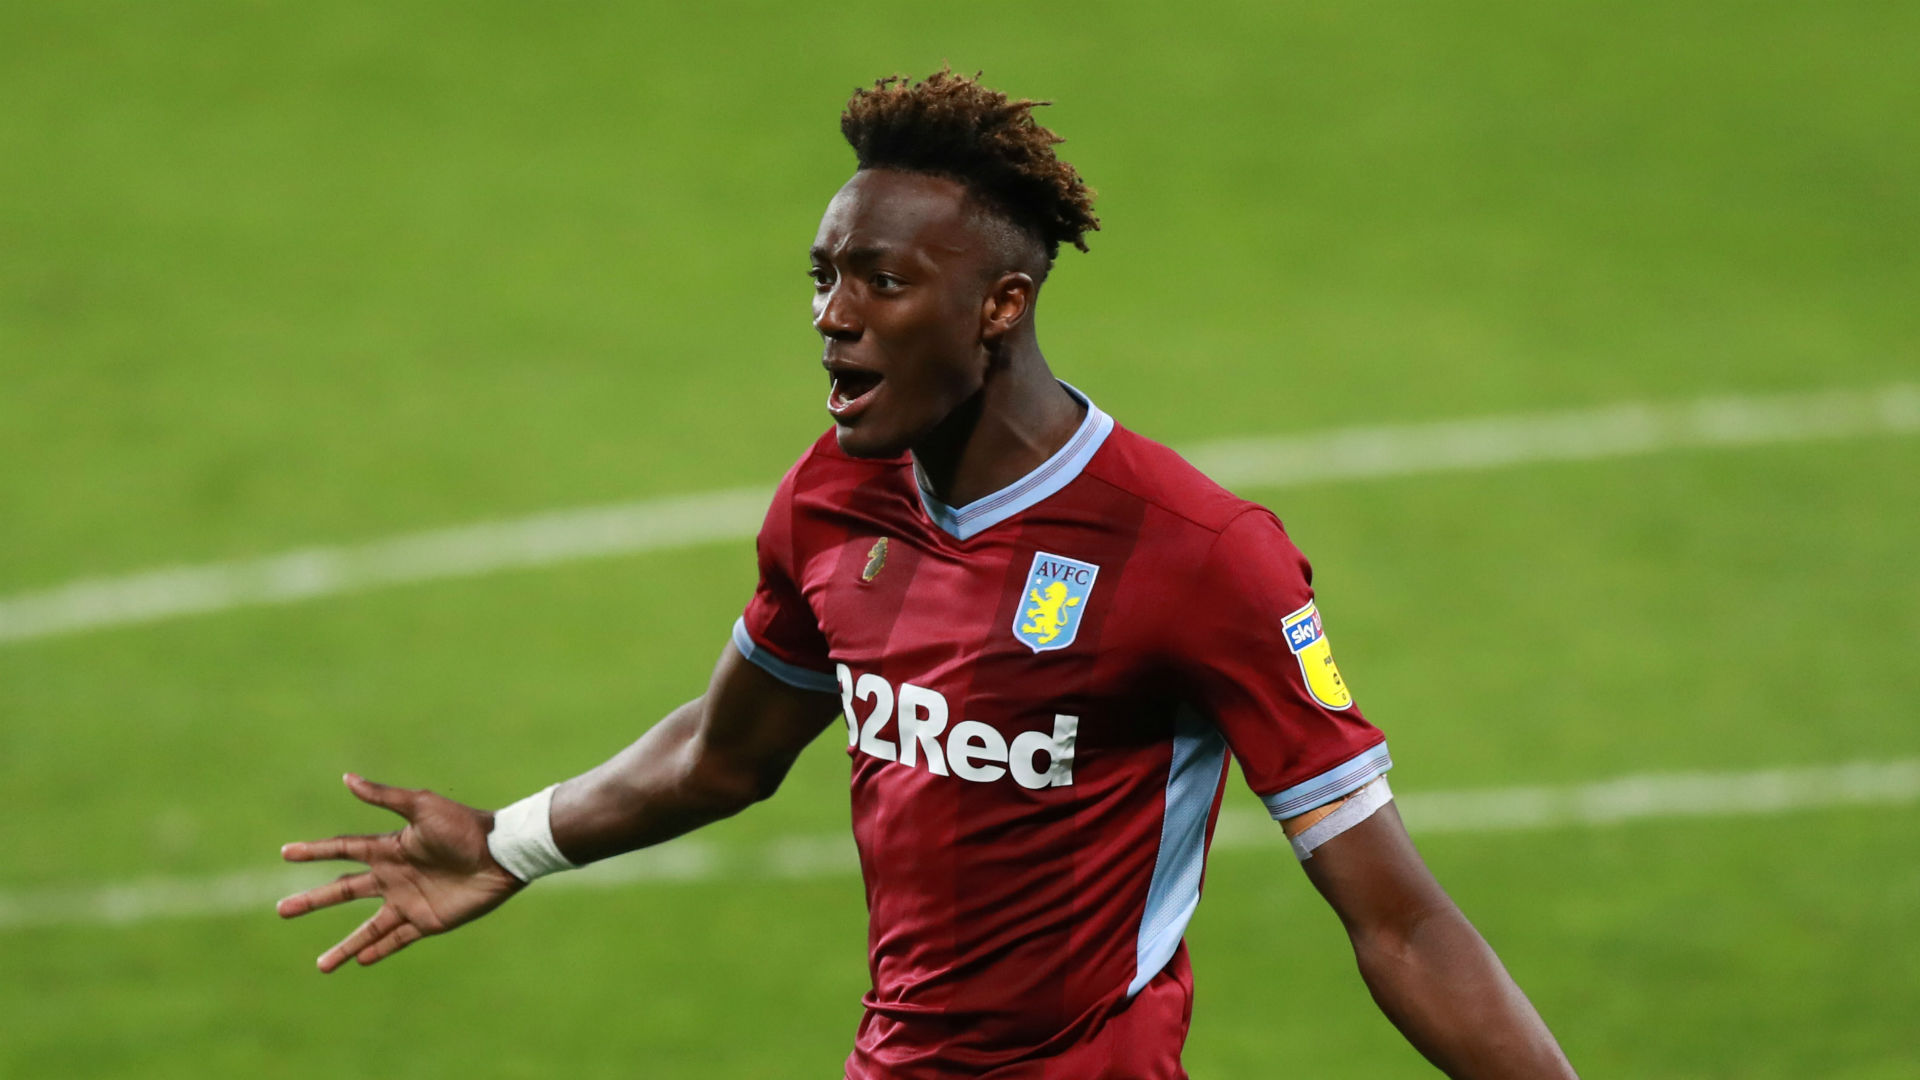 Chelsea are reaping the benefits of the work Tammy Abraham did with John Terry last season, according to head coach Frank Lampard.